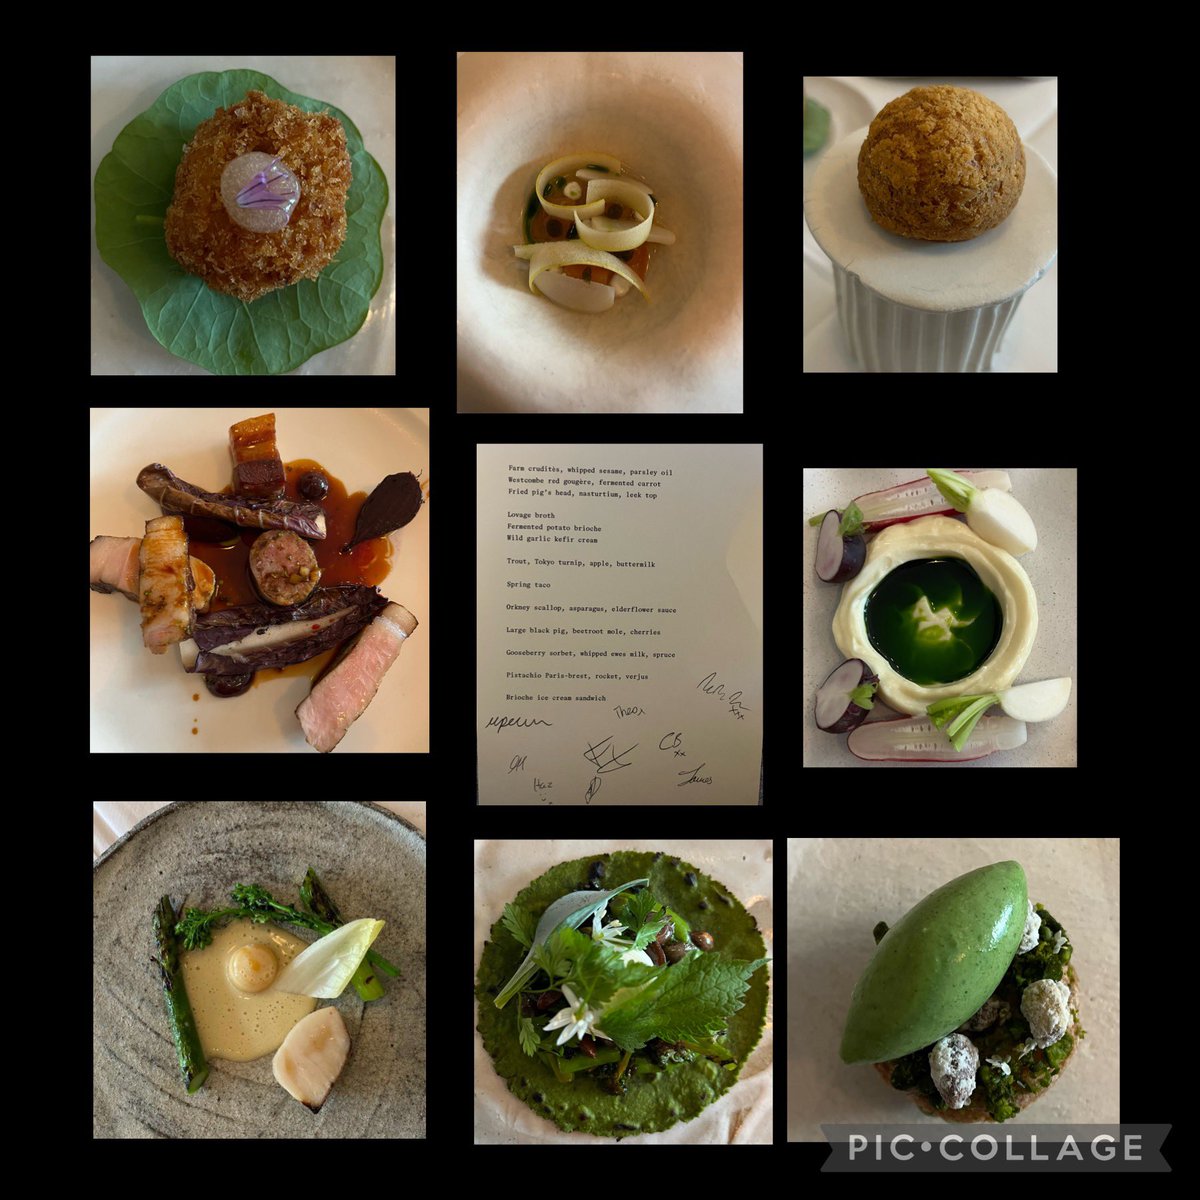 Rare treat. Totally stuffed now .  Fabulous imaginative taster menu. Going to try some of these in my own kitchen( especially the lovage broth) 
Brilliant chefs and lovely staff . 
Osip in Bruton 
#bruton